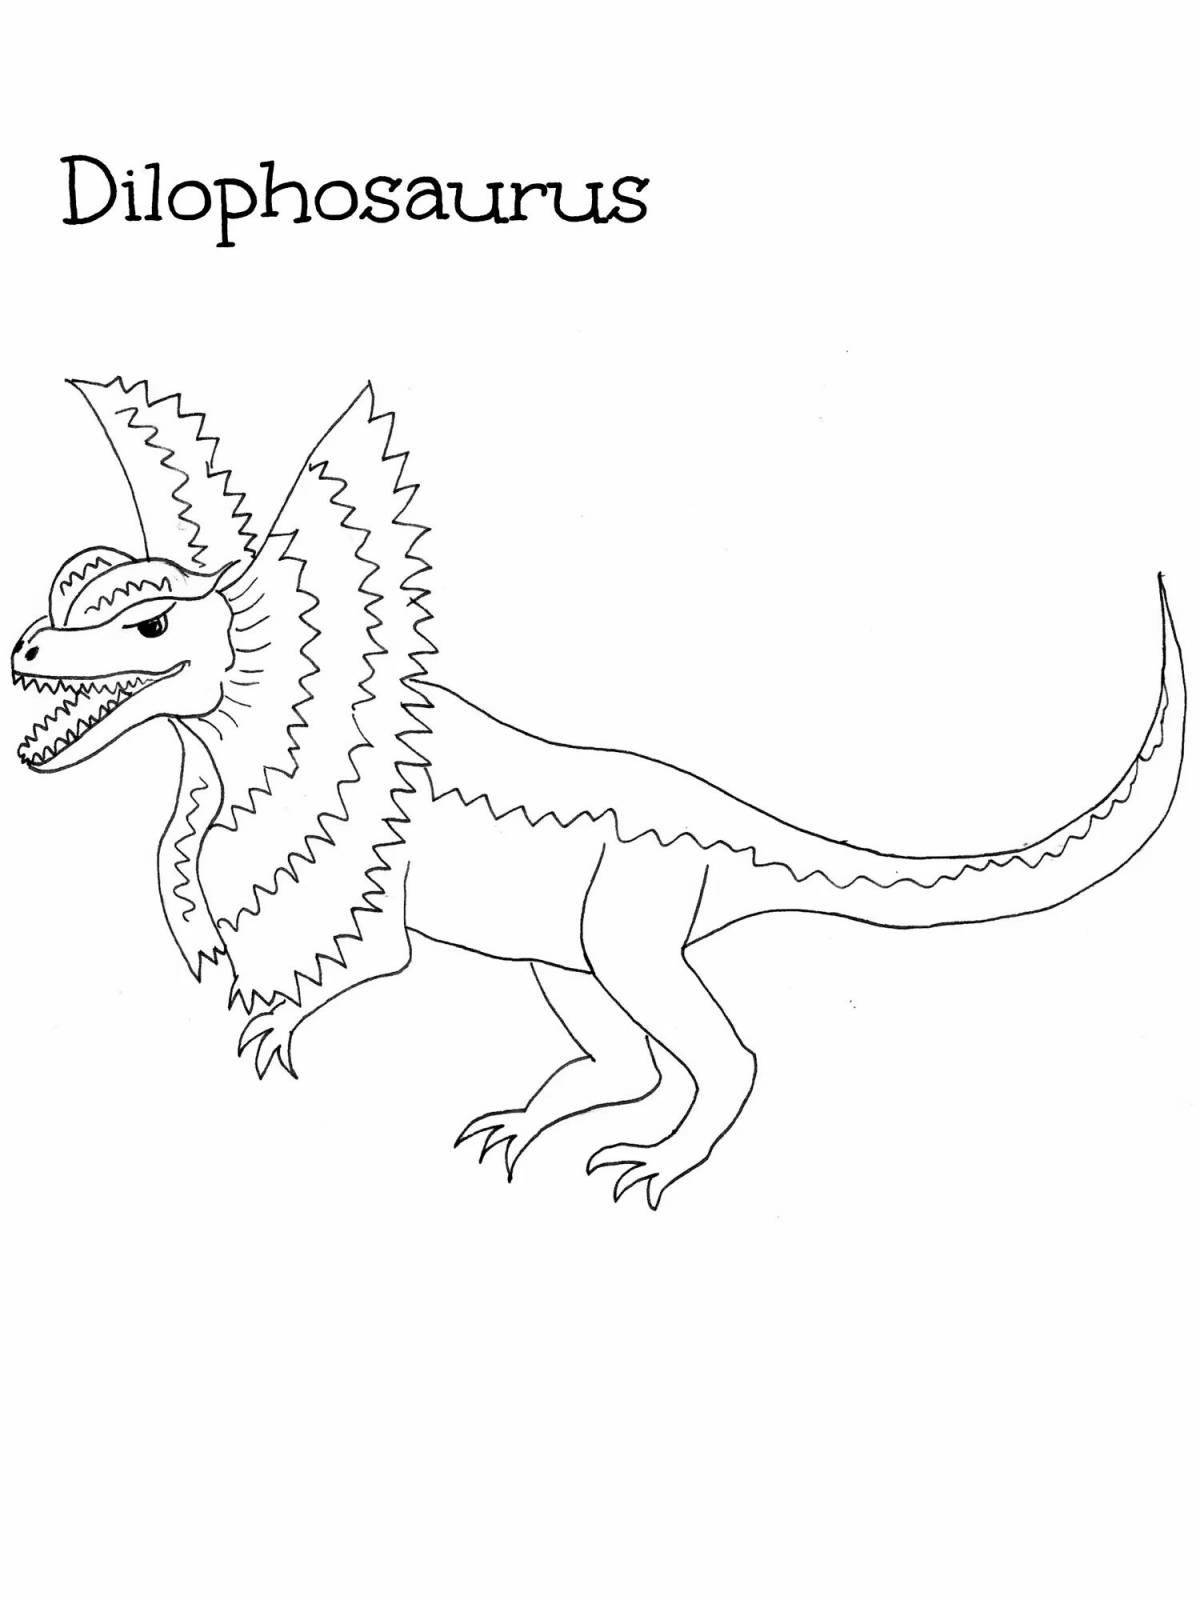 Colorful dilophosaurus coloring page